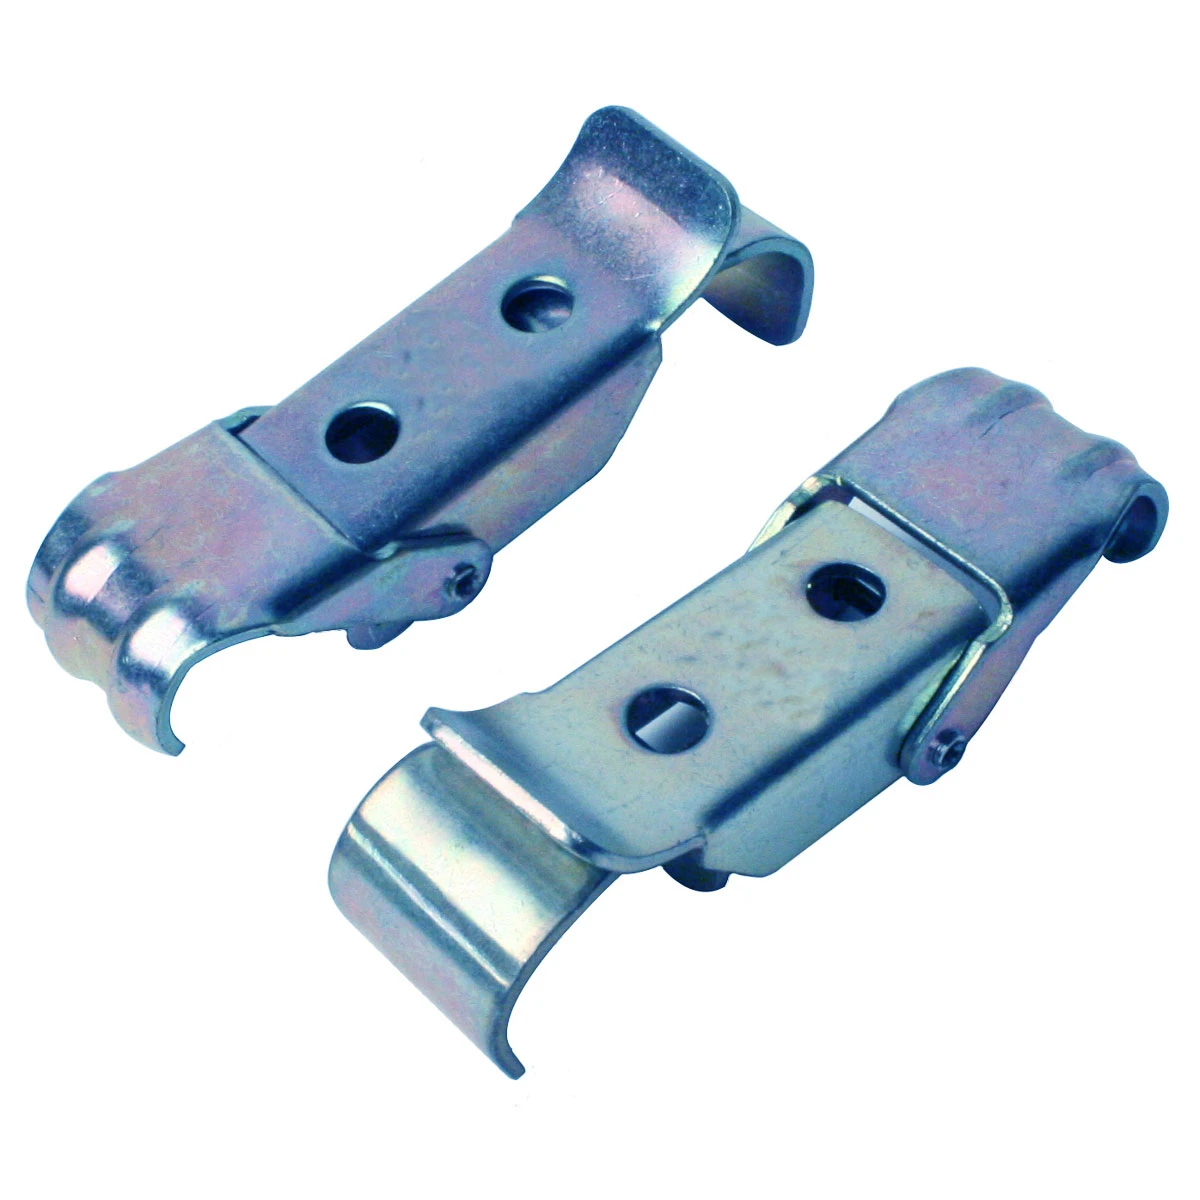 KG Nosecone Clamp Steel 2 Piece